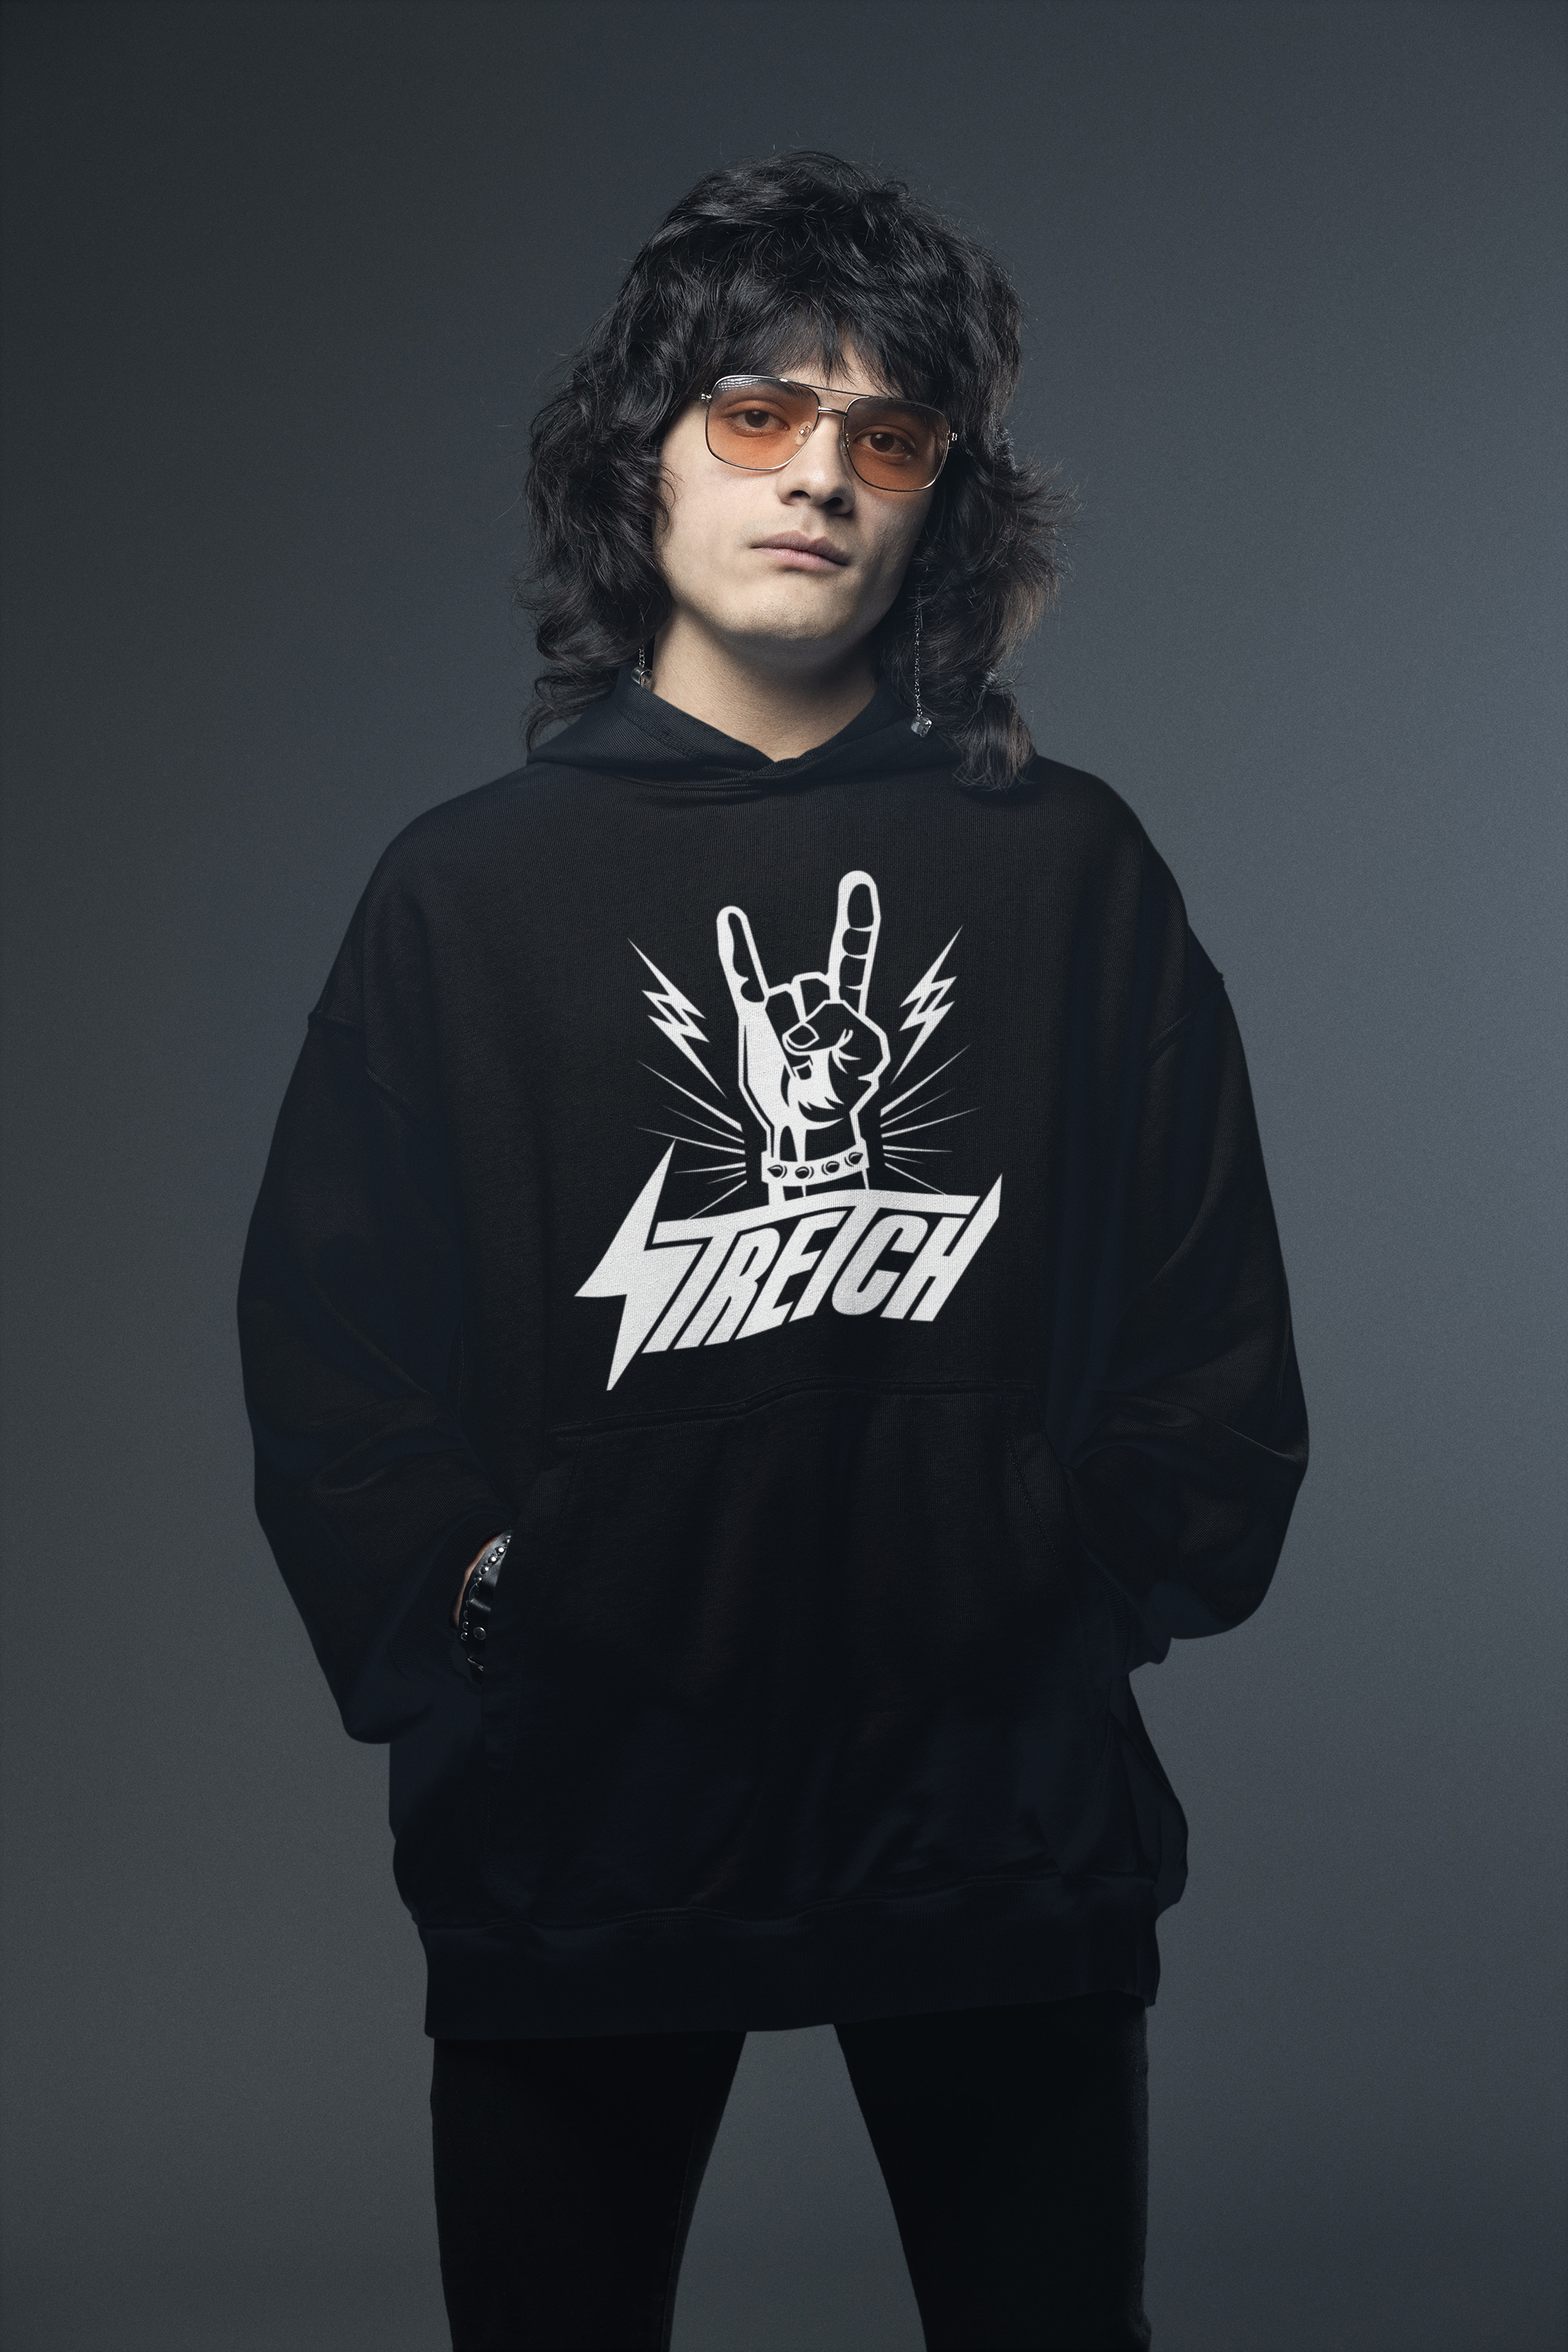 STRETCH “FIST OF ROCK” Hoodie